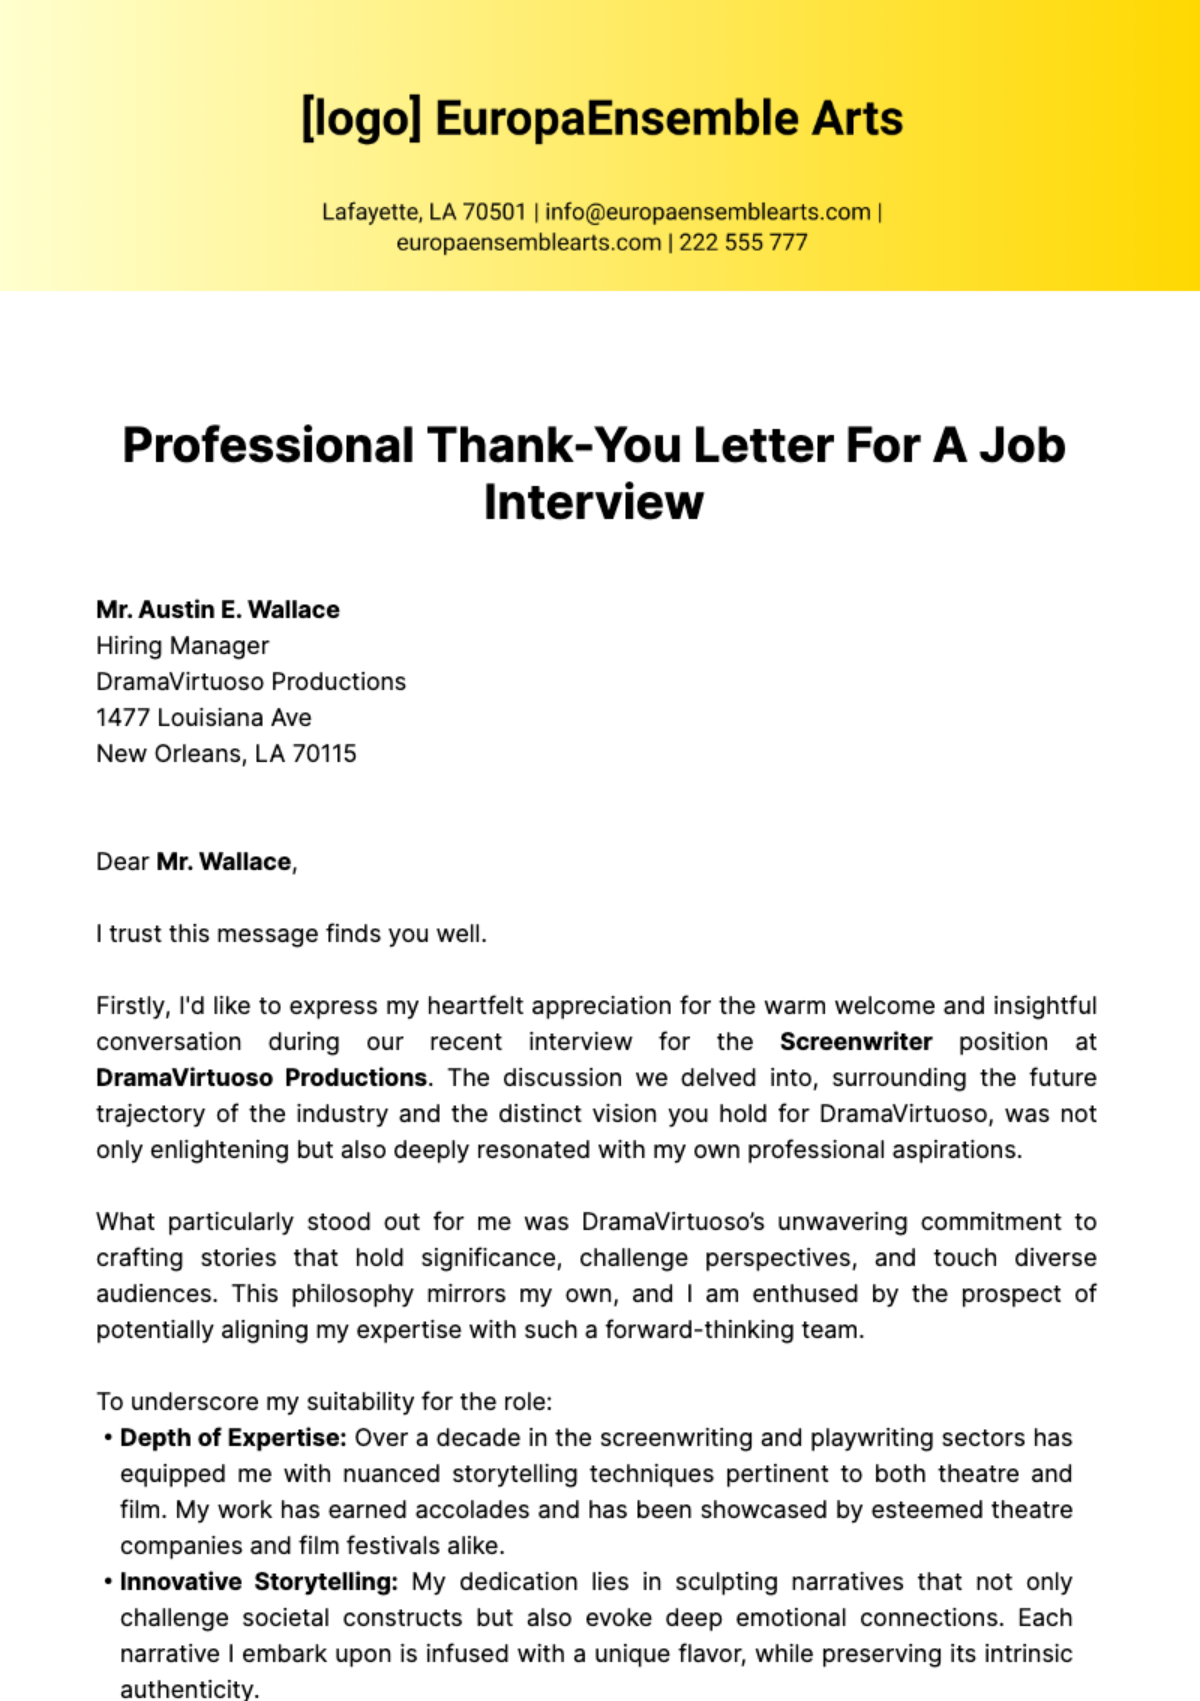 Free Professional Thank-You Letter for a Job Interview Template